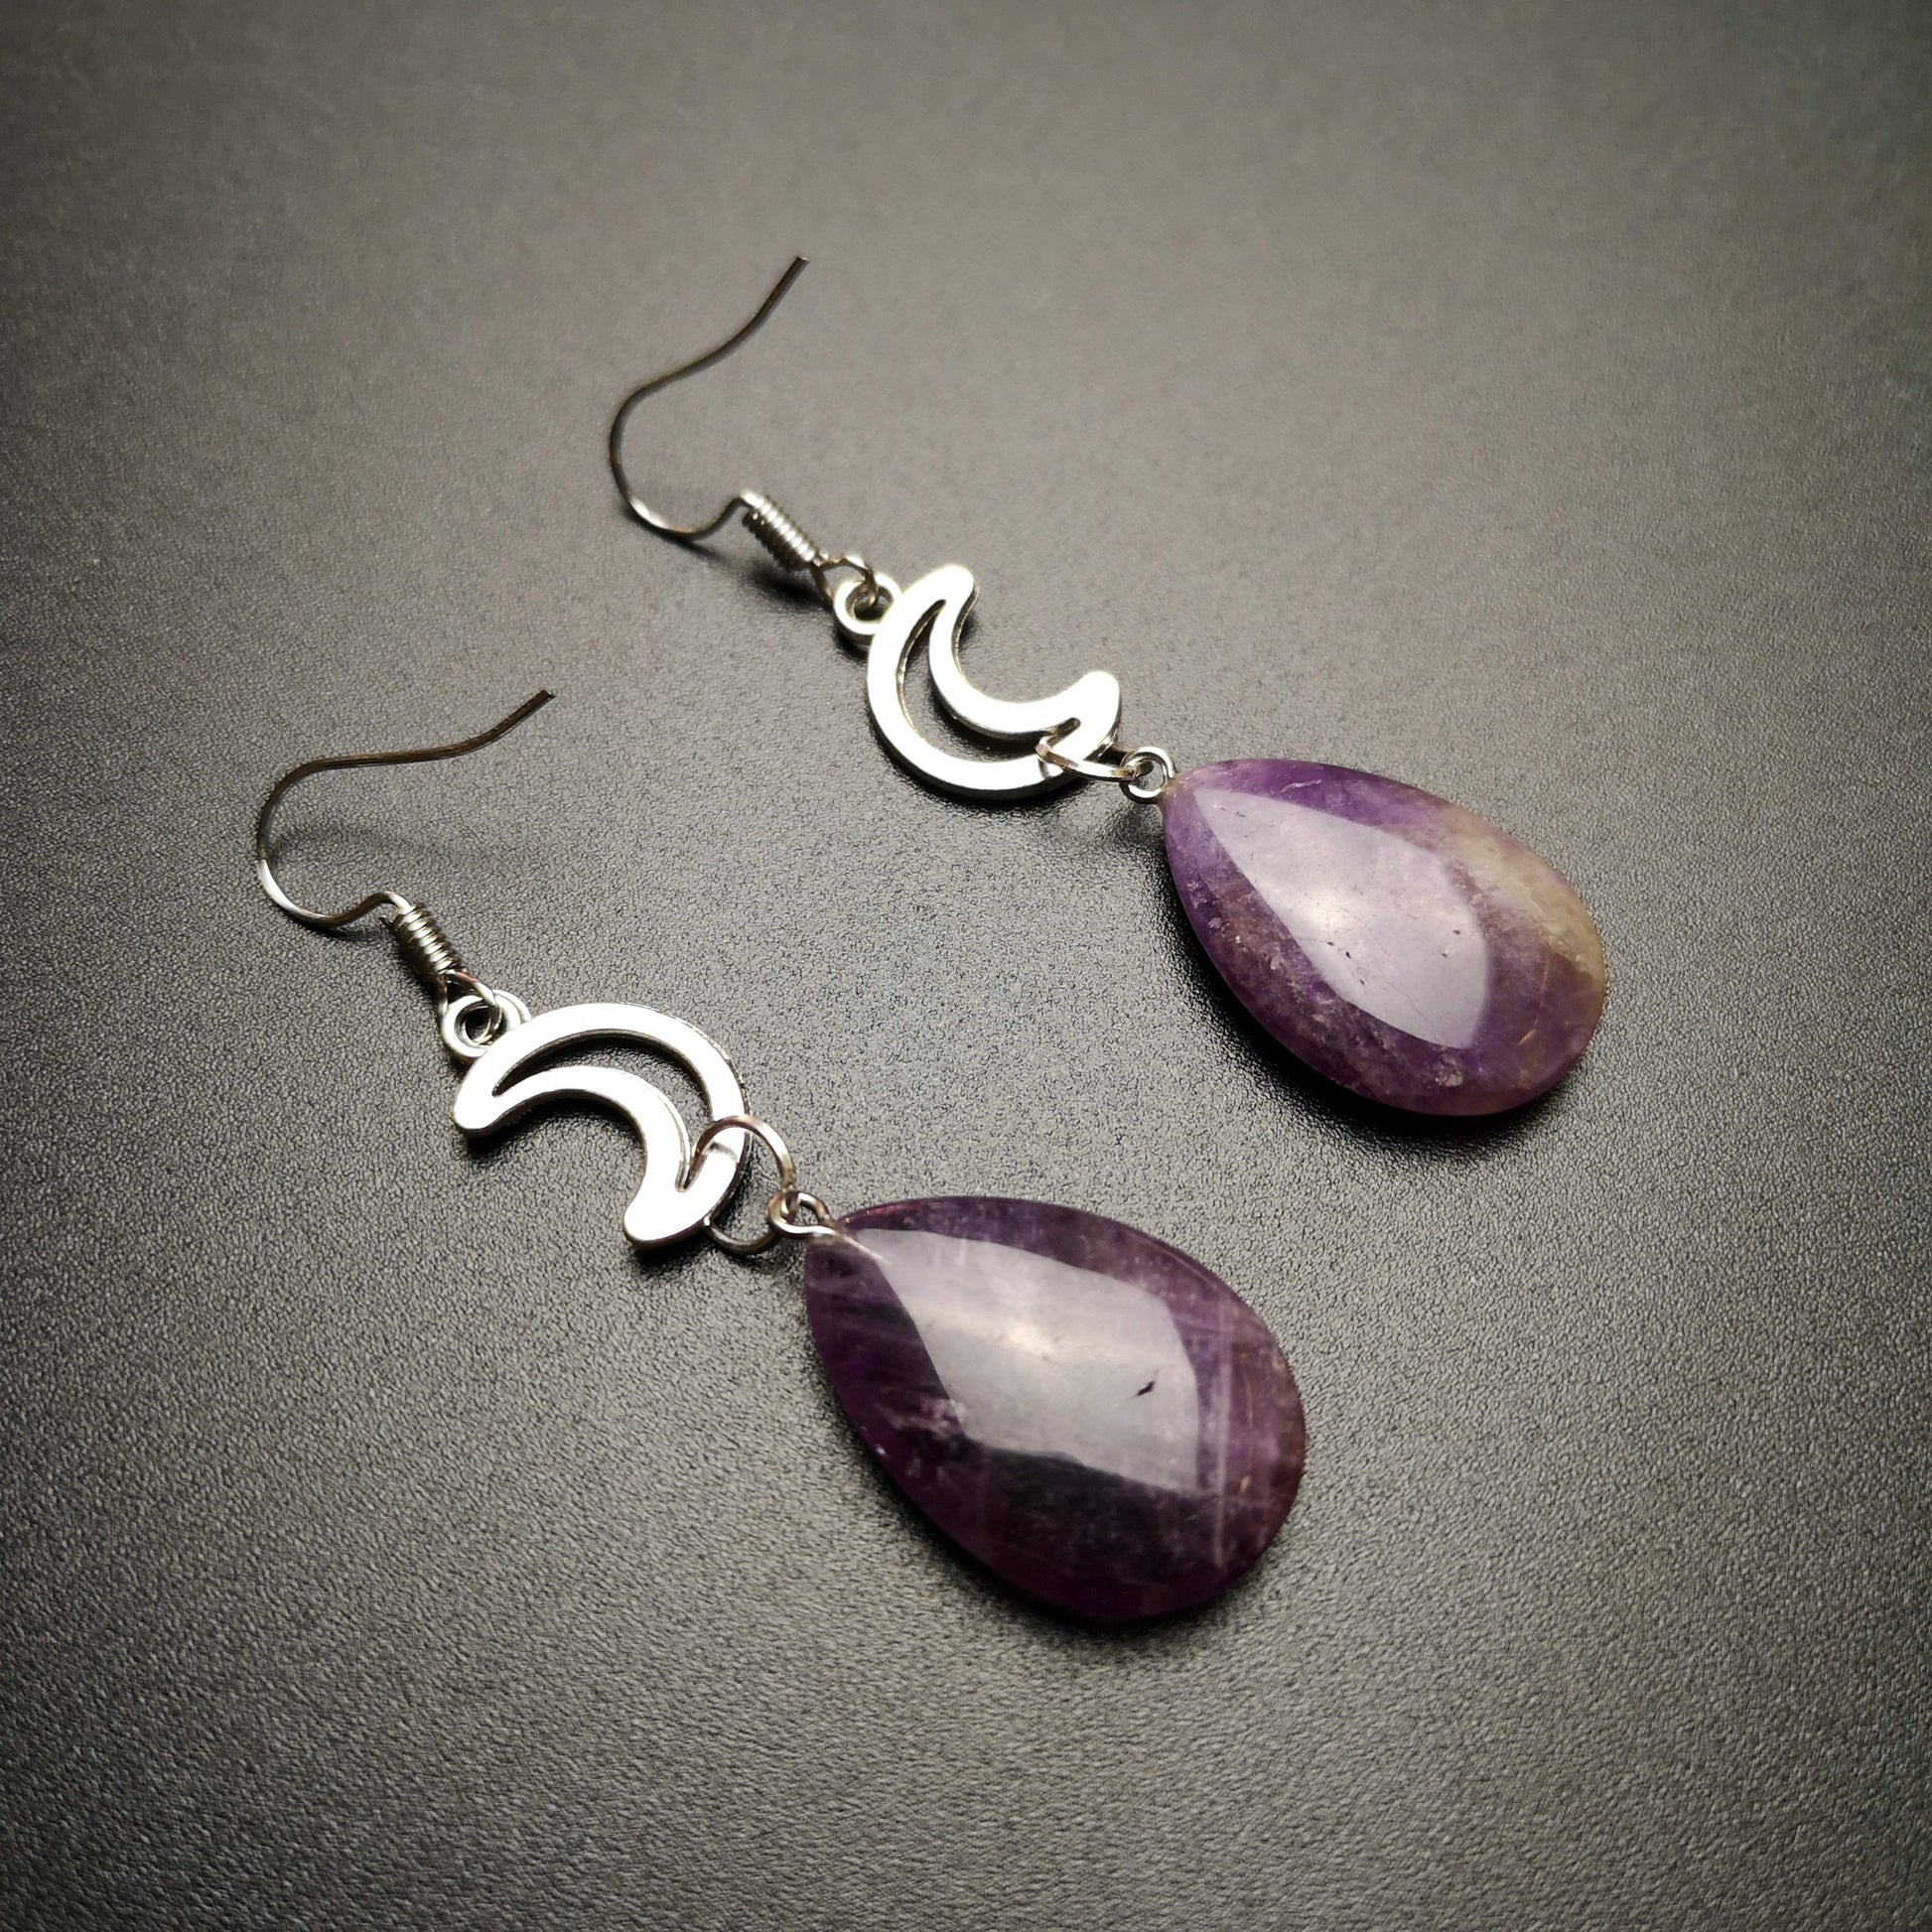 Amethyst and crescent moon witchy earrings - The French Witch shop